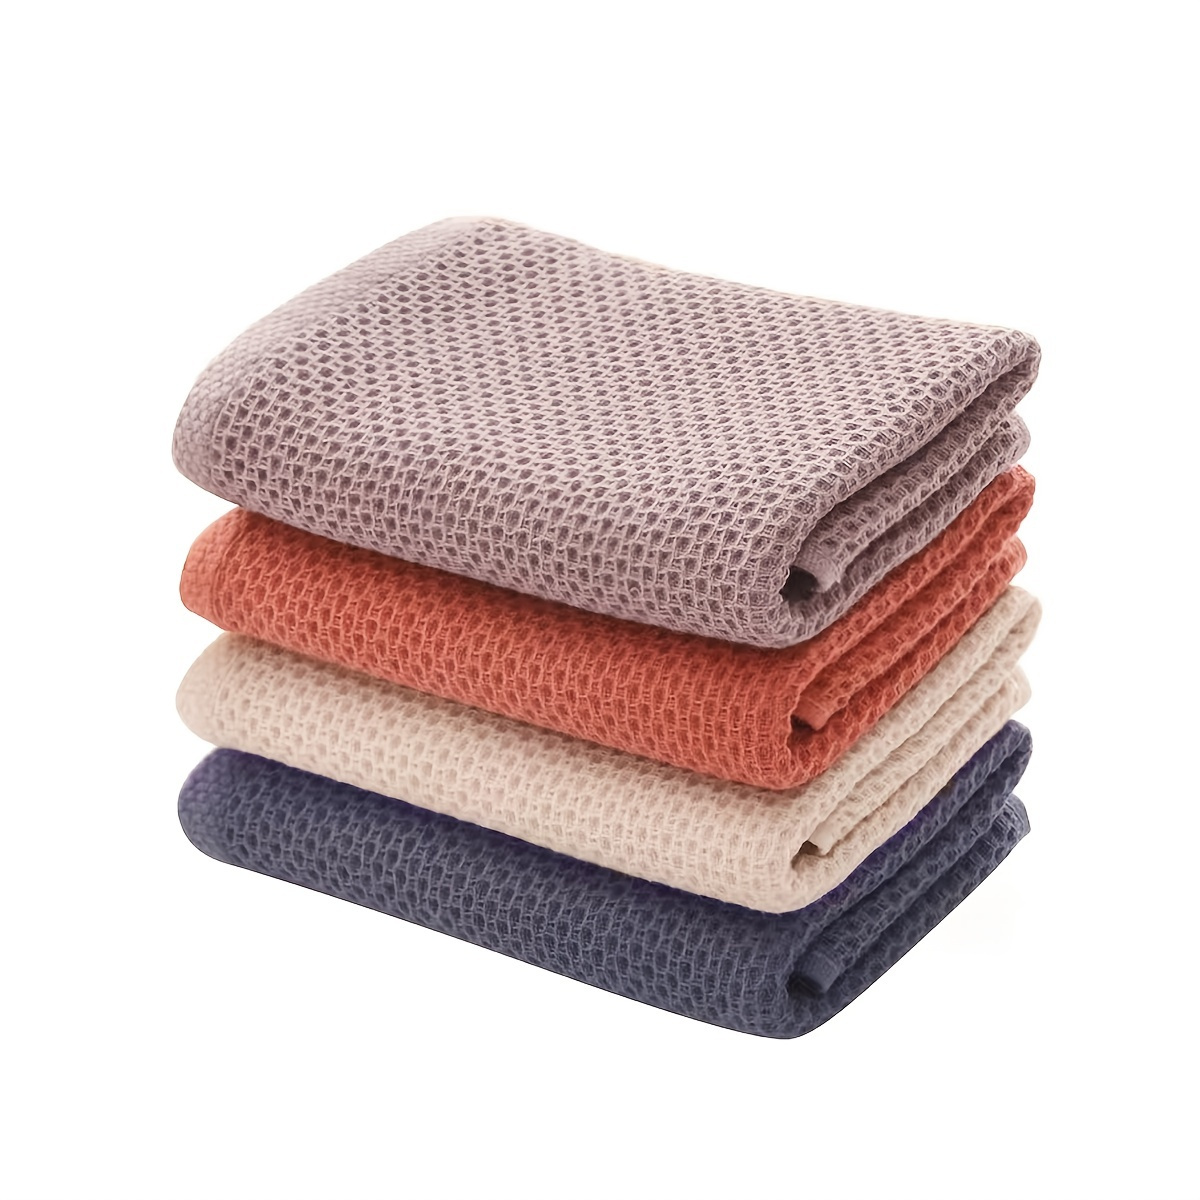 2Pcs 34*34cm Cotton Dishcloth Honeycomb Towel Ultra Soft Absorbent Hand Towel  Wash Cloth Household Kitchen Cleaning Cloth Tool